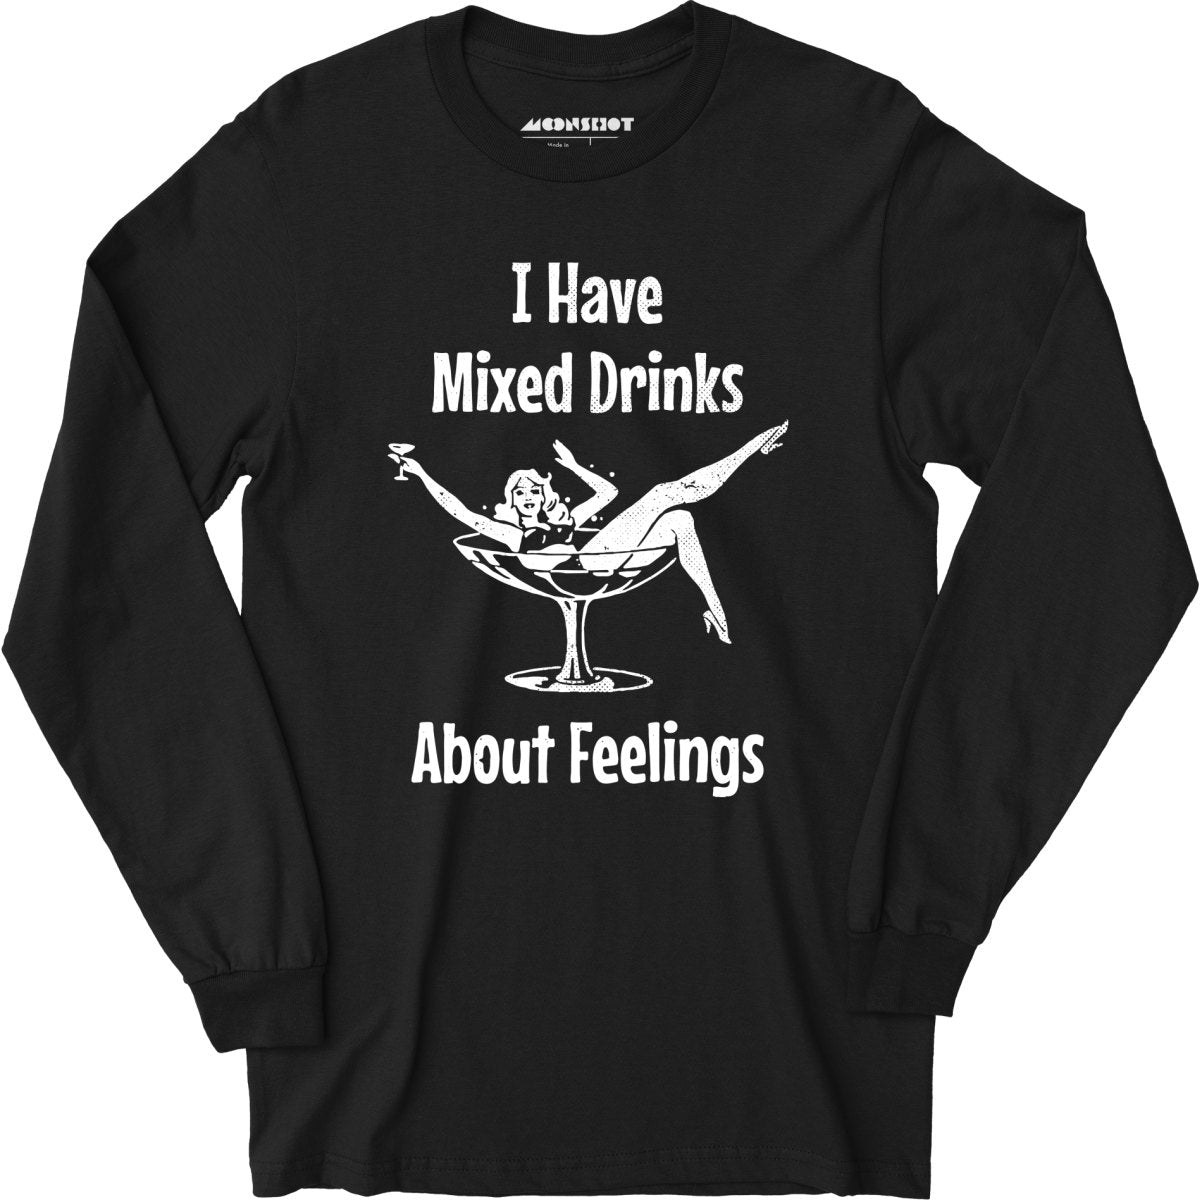 I Have Mixed Drinks About Feelings - Long Sleeve T-Shirt